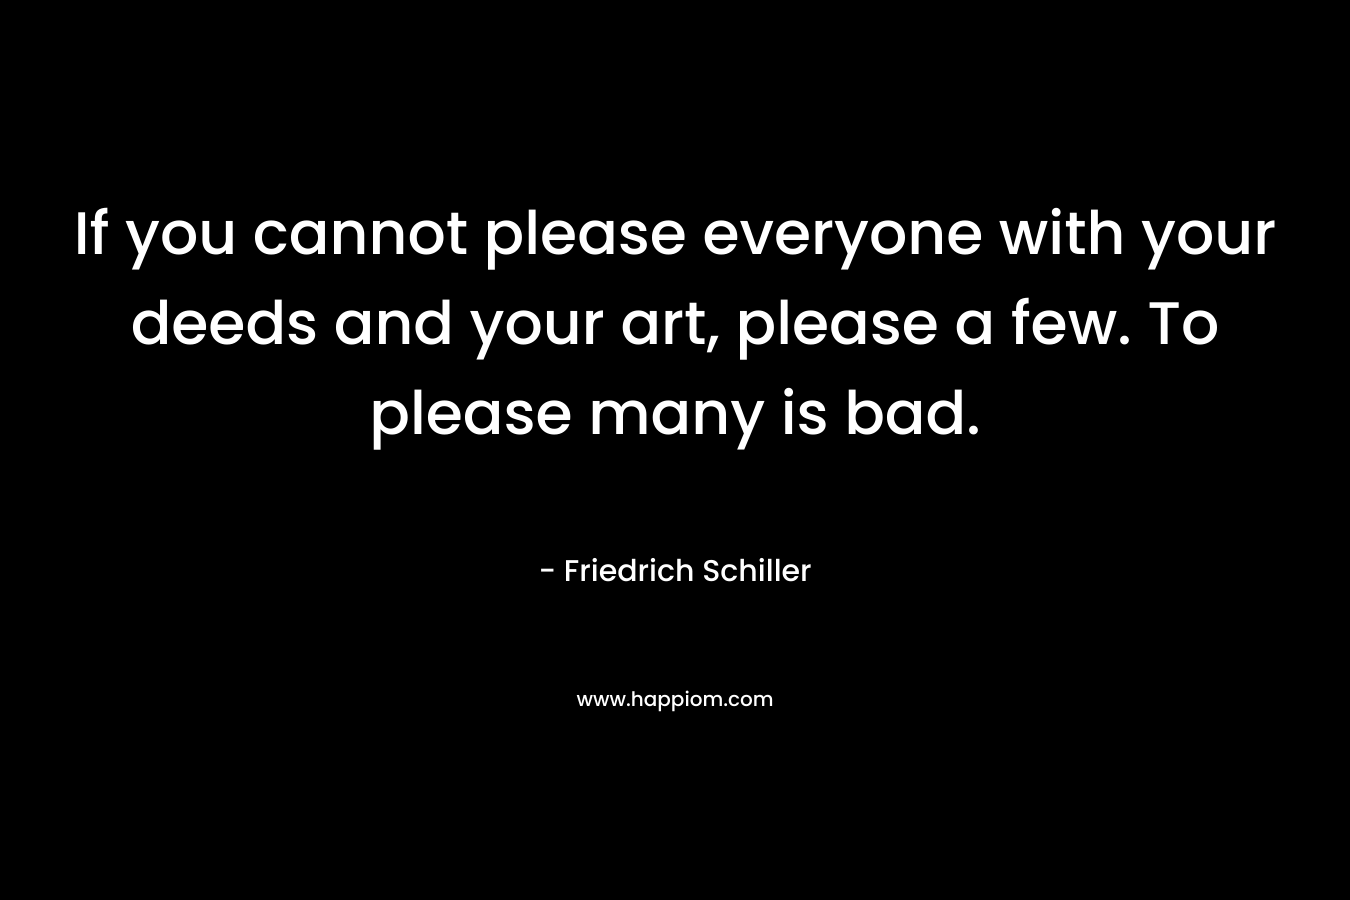 If you cannot please everyone with your deeds and your art, please a few. To please many is bad. – Friedrich Schiller